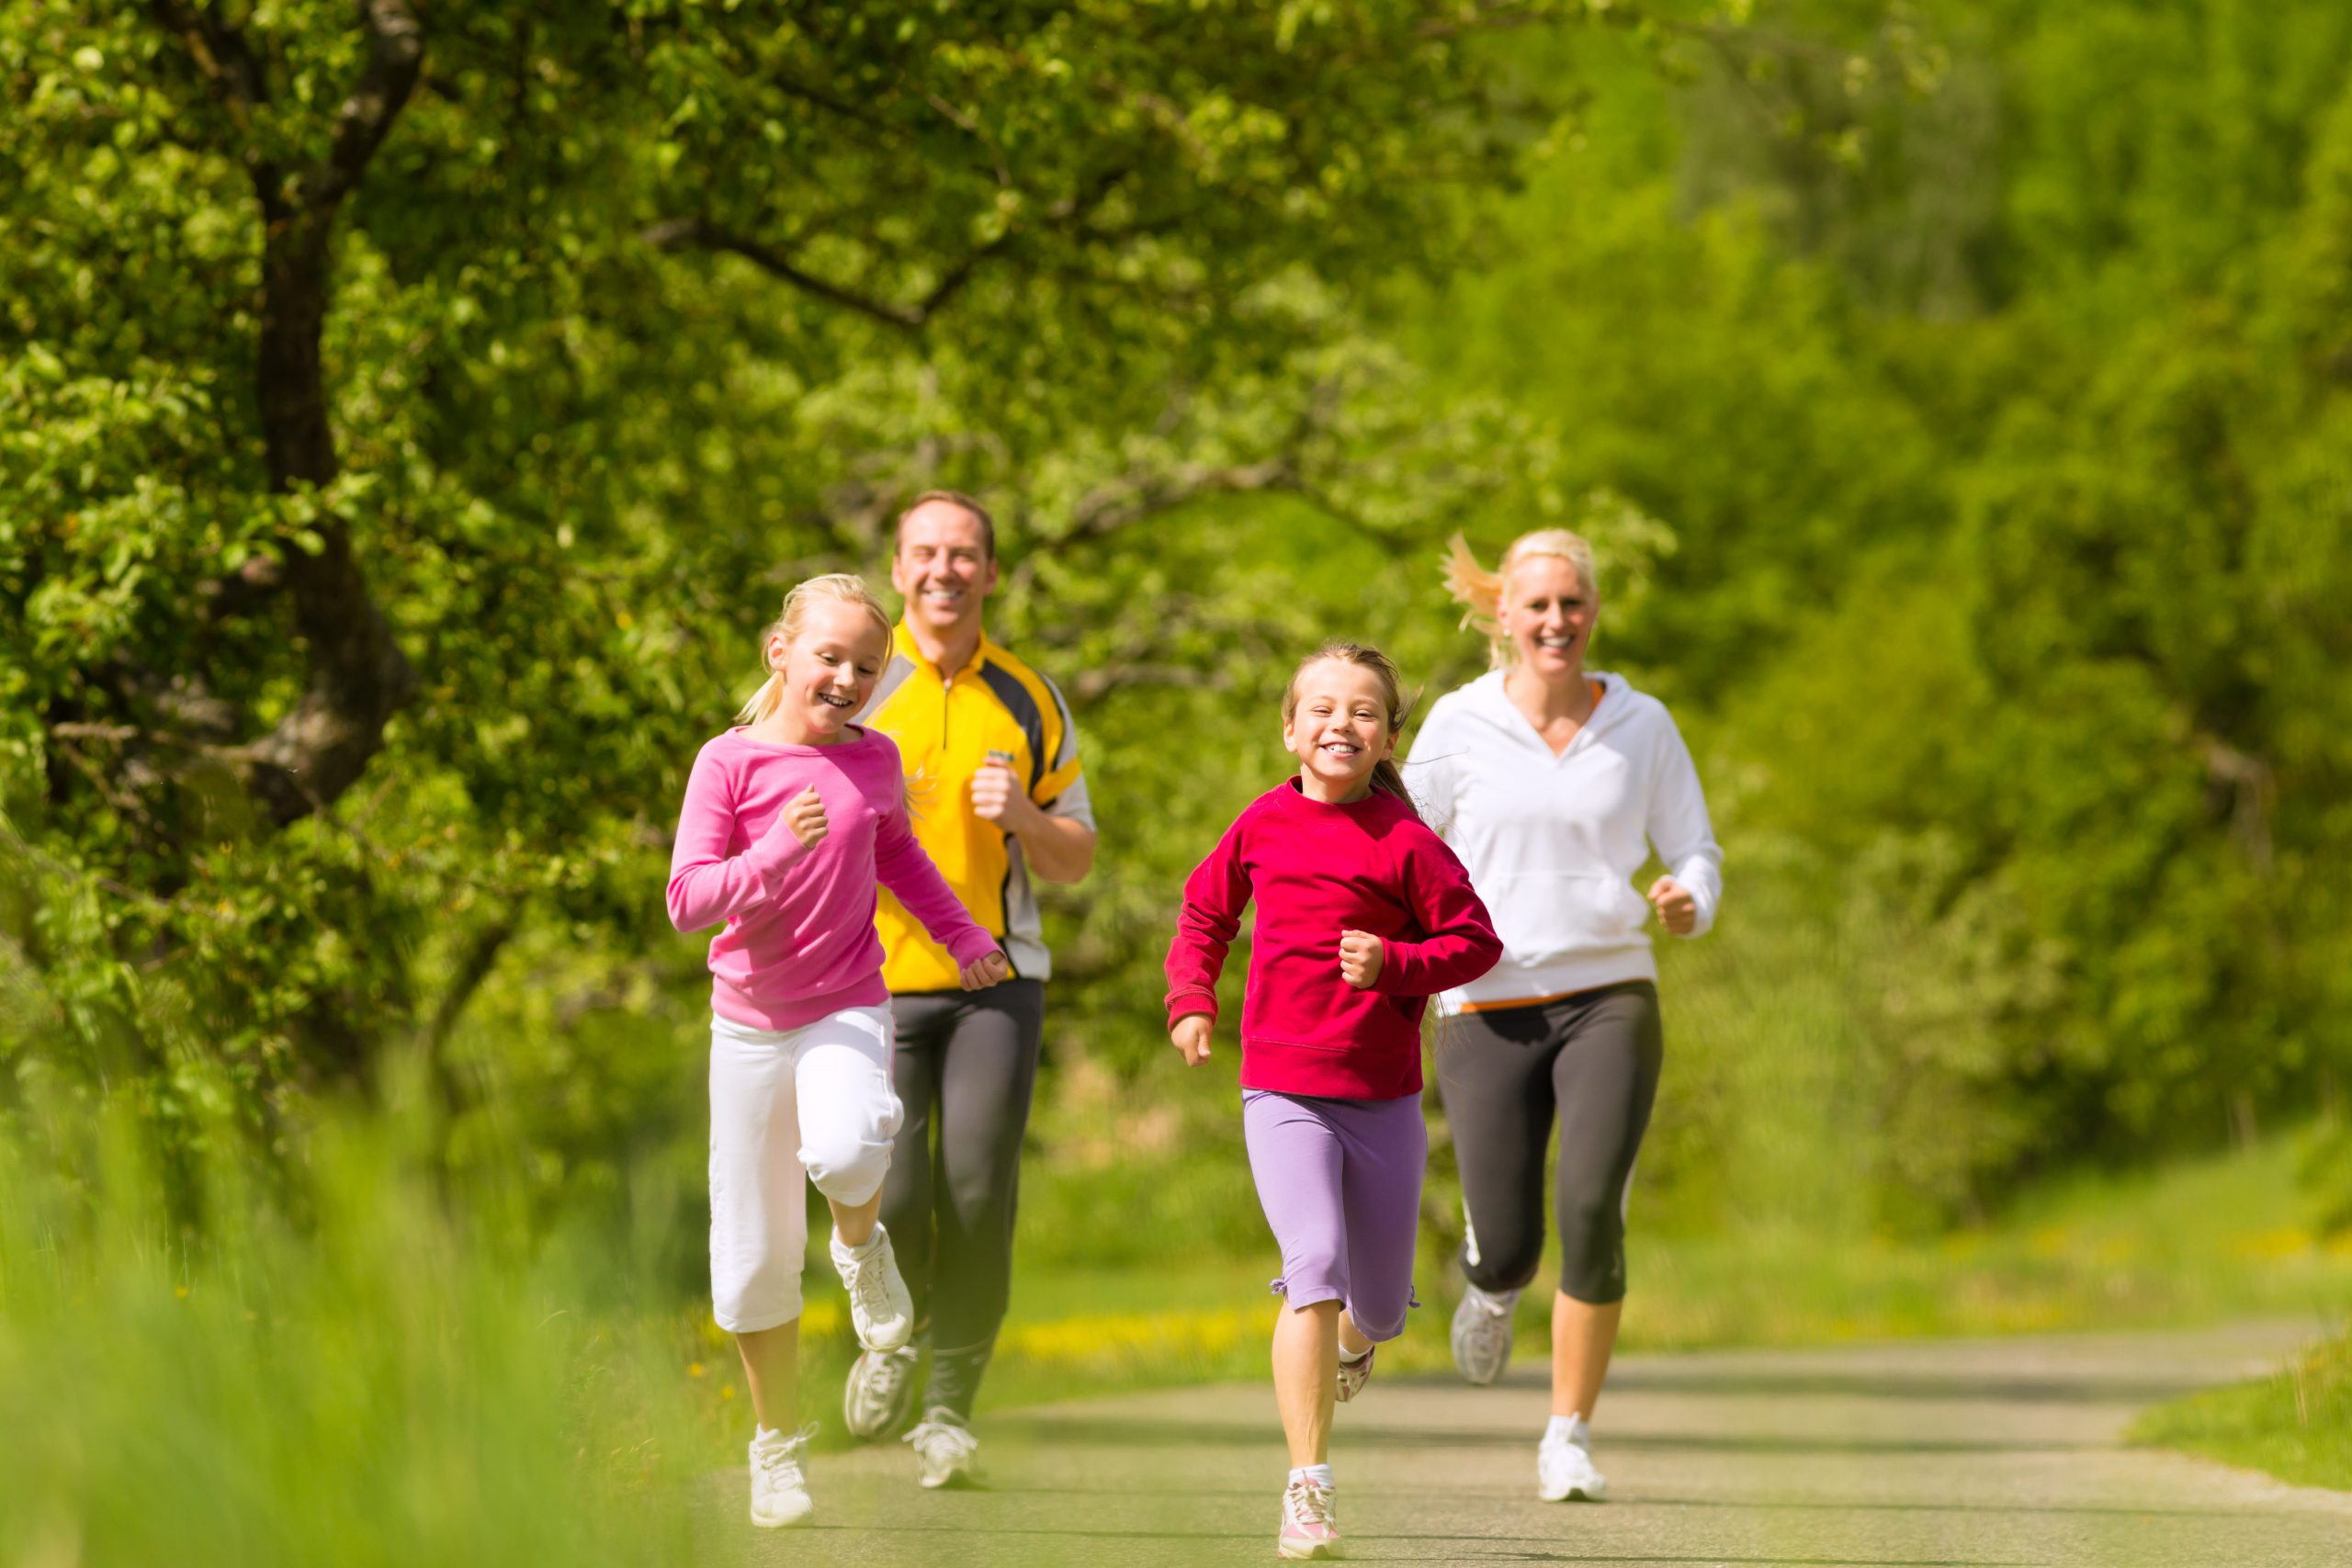 A Healthy Lifestyle: The Importance of Physical Activity